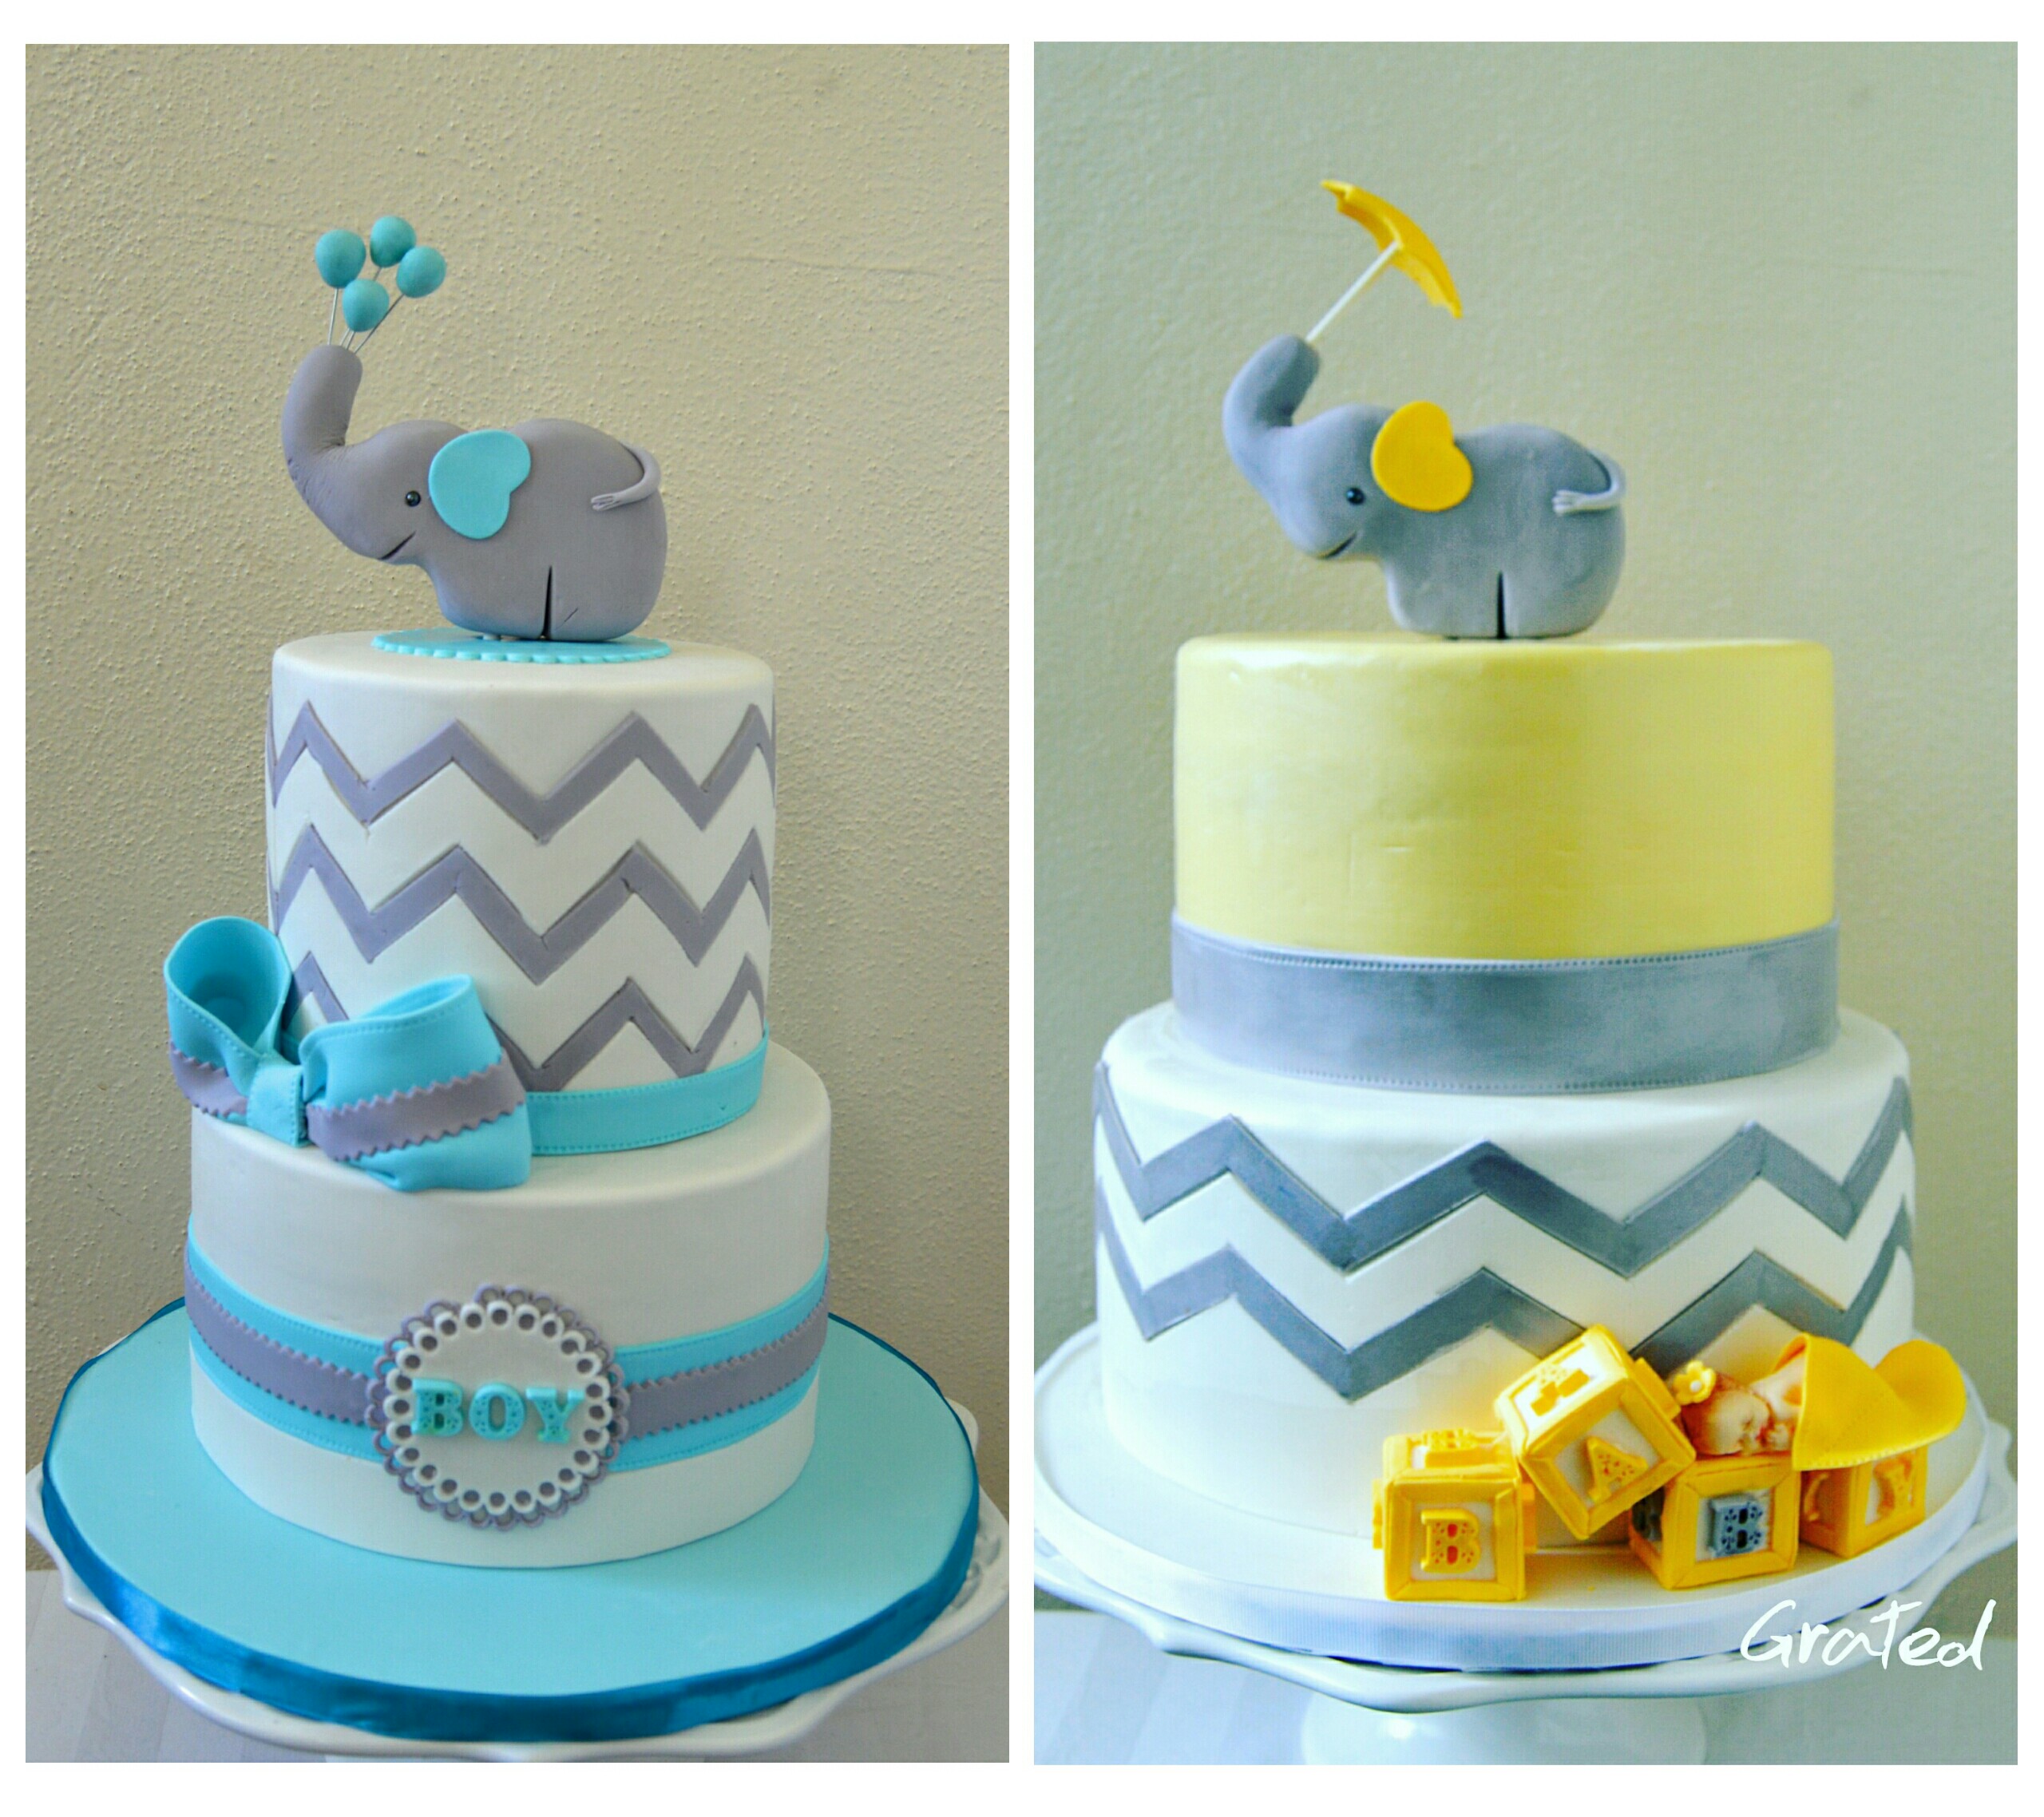 Chevron Baby Shower Cakes with Elephant Toppers